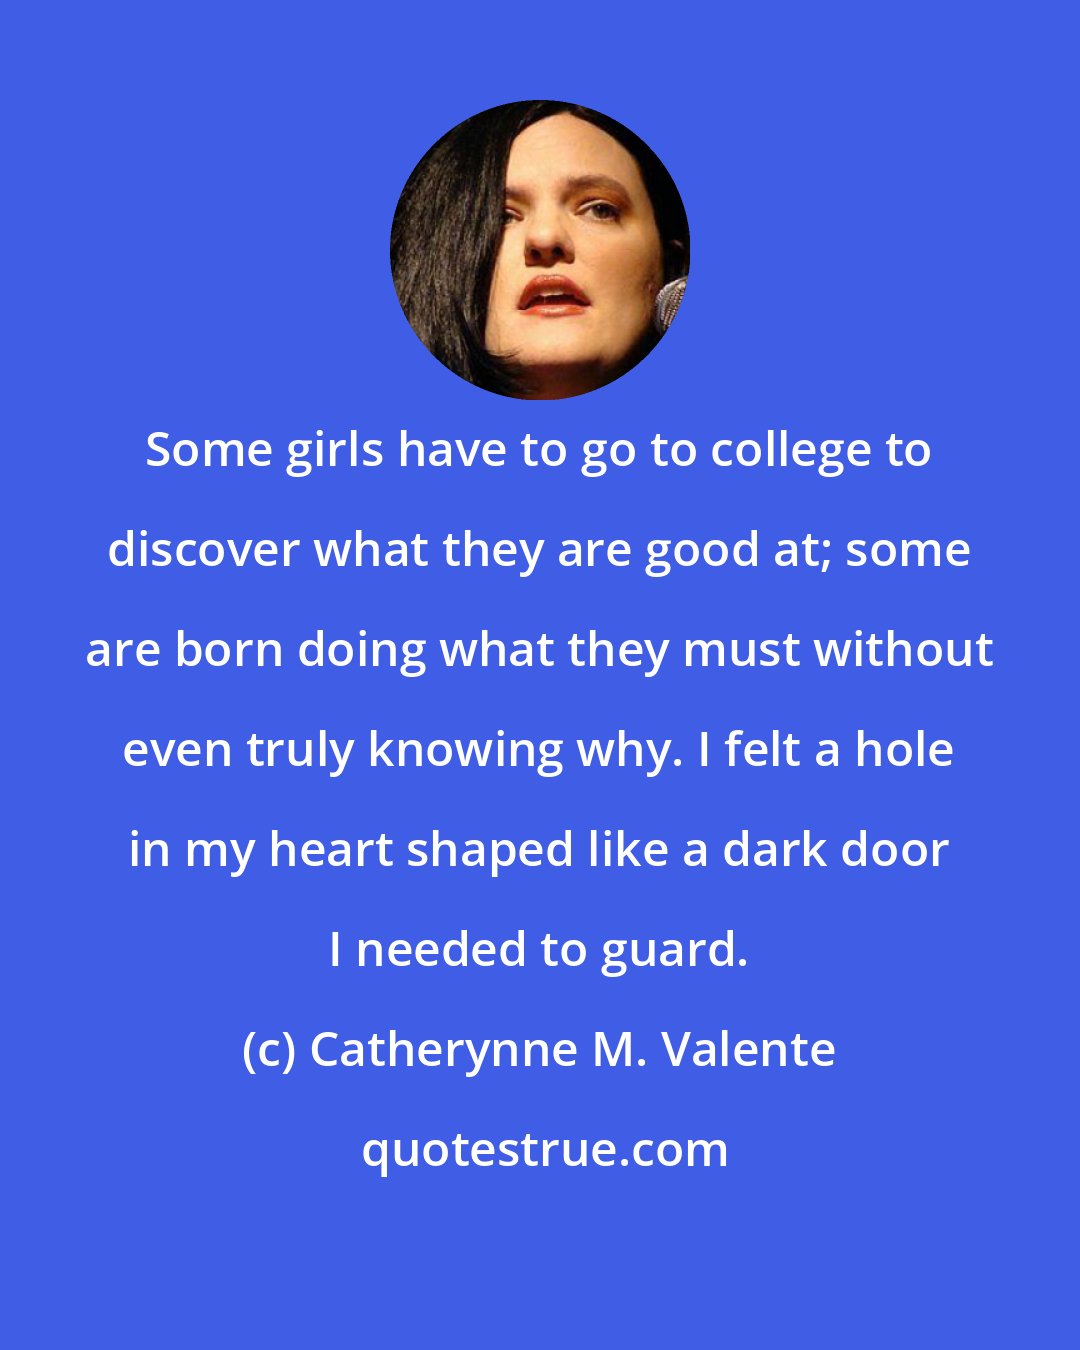 Catherynne M. Valente: Some girls have to go to college to discover what they are good at; some are born doing what they must without even truly knowing why. I felt a hole in my heart shaped like a dark door I needed to guard.